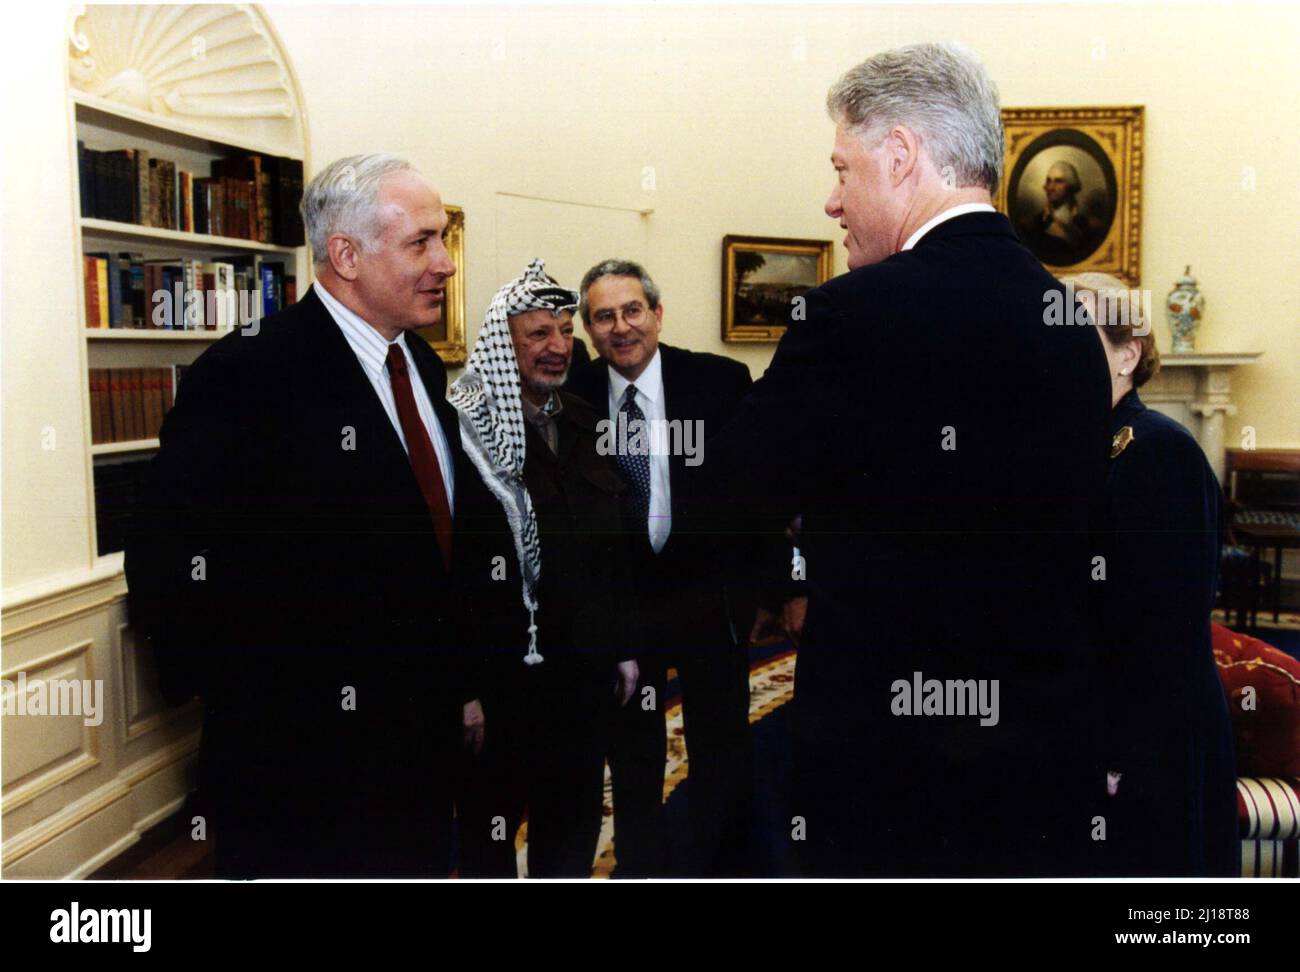 United States President Bill Clinton meets with Prime Minister Binyamin Netanyahu and Palestinian Authority Chairman Yasser Arafat in the Oval Office in the White House in Washington, DC on Thursday, October 15, 1998. Pictured from left to right: Prime Minister Netanyahu; Chairman Arafat; Gamal Helal, the Interpreter; President Clinton; Secretary of State Madeleine Albright.Mandatory Credit: Barbara Kinney/White House via CNP/Sipa USA Credit: Sipa USA/Alamy Live News Stock Photo